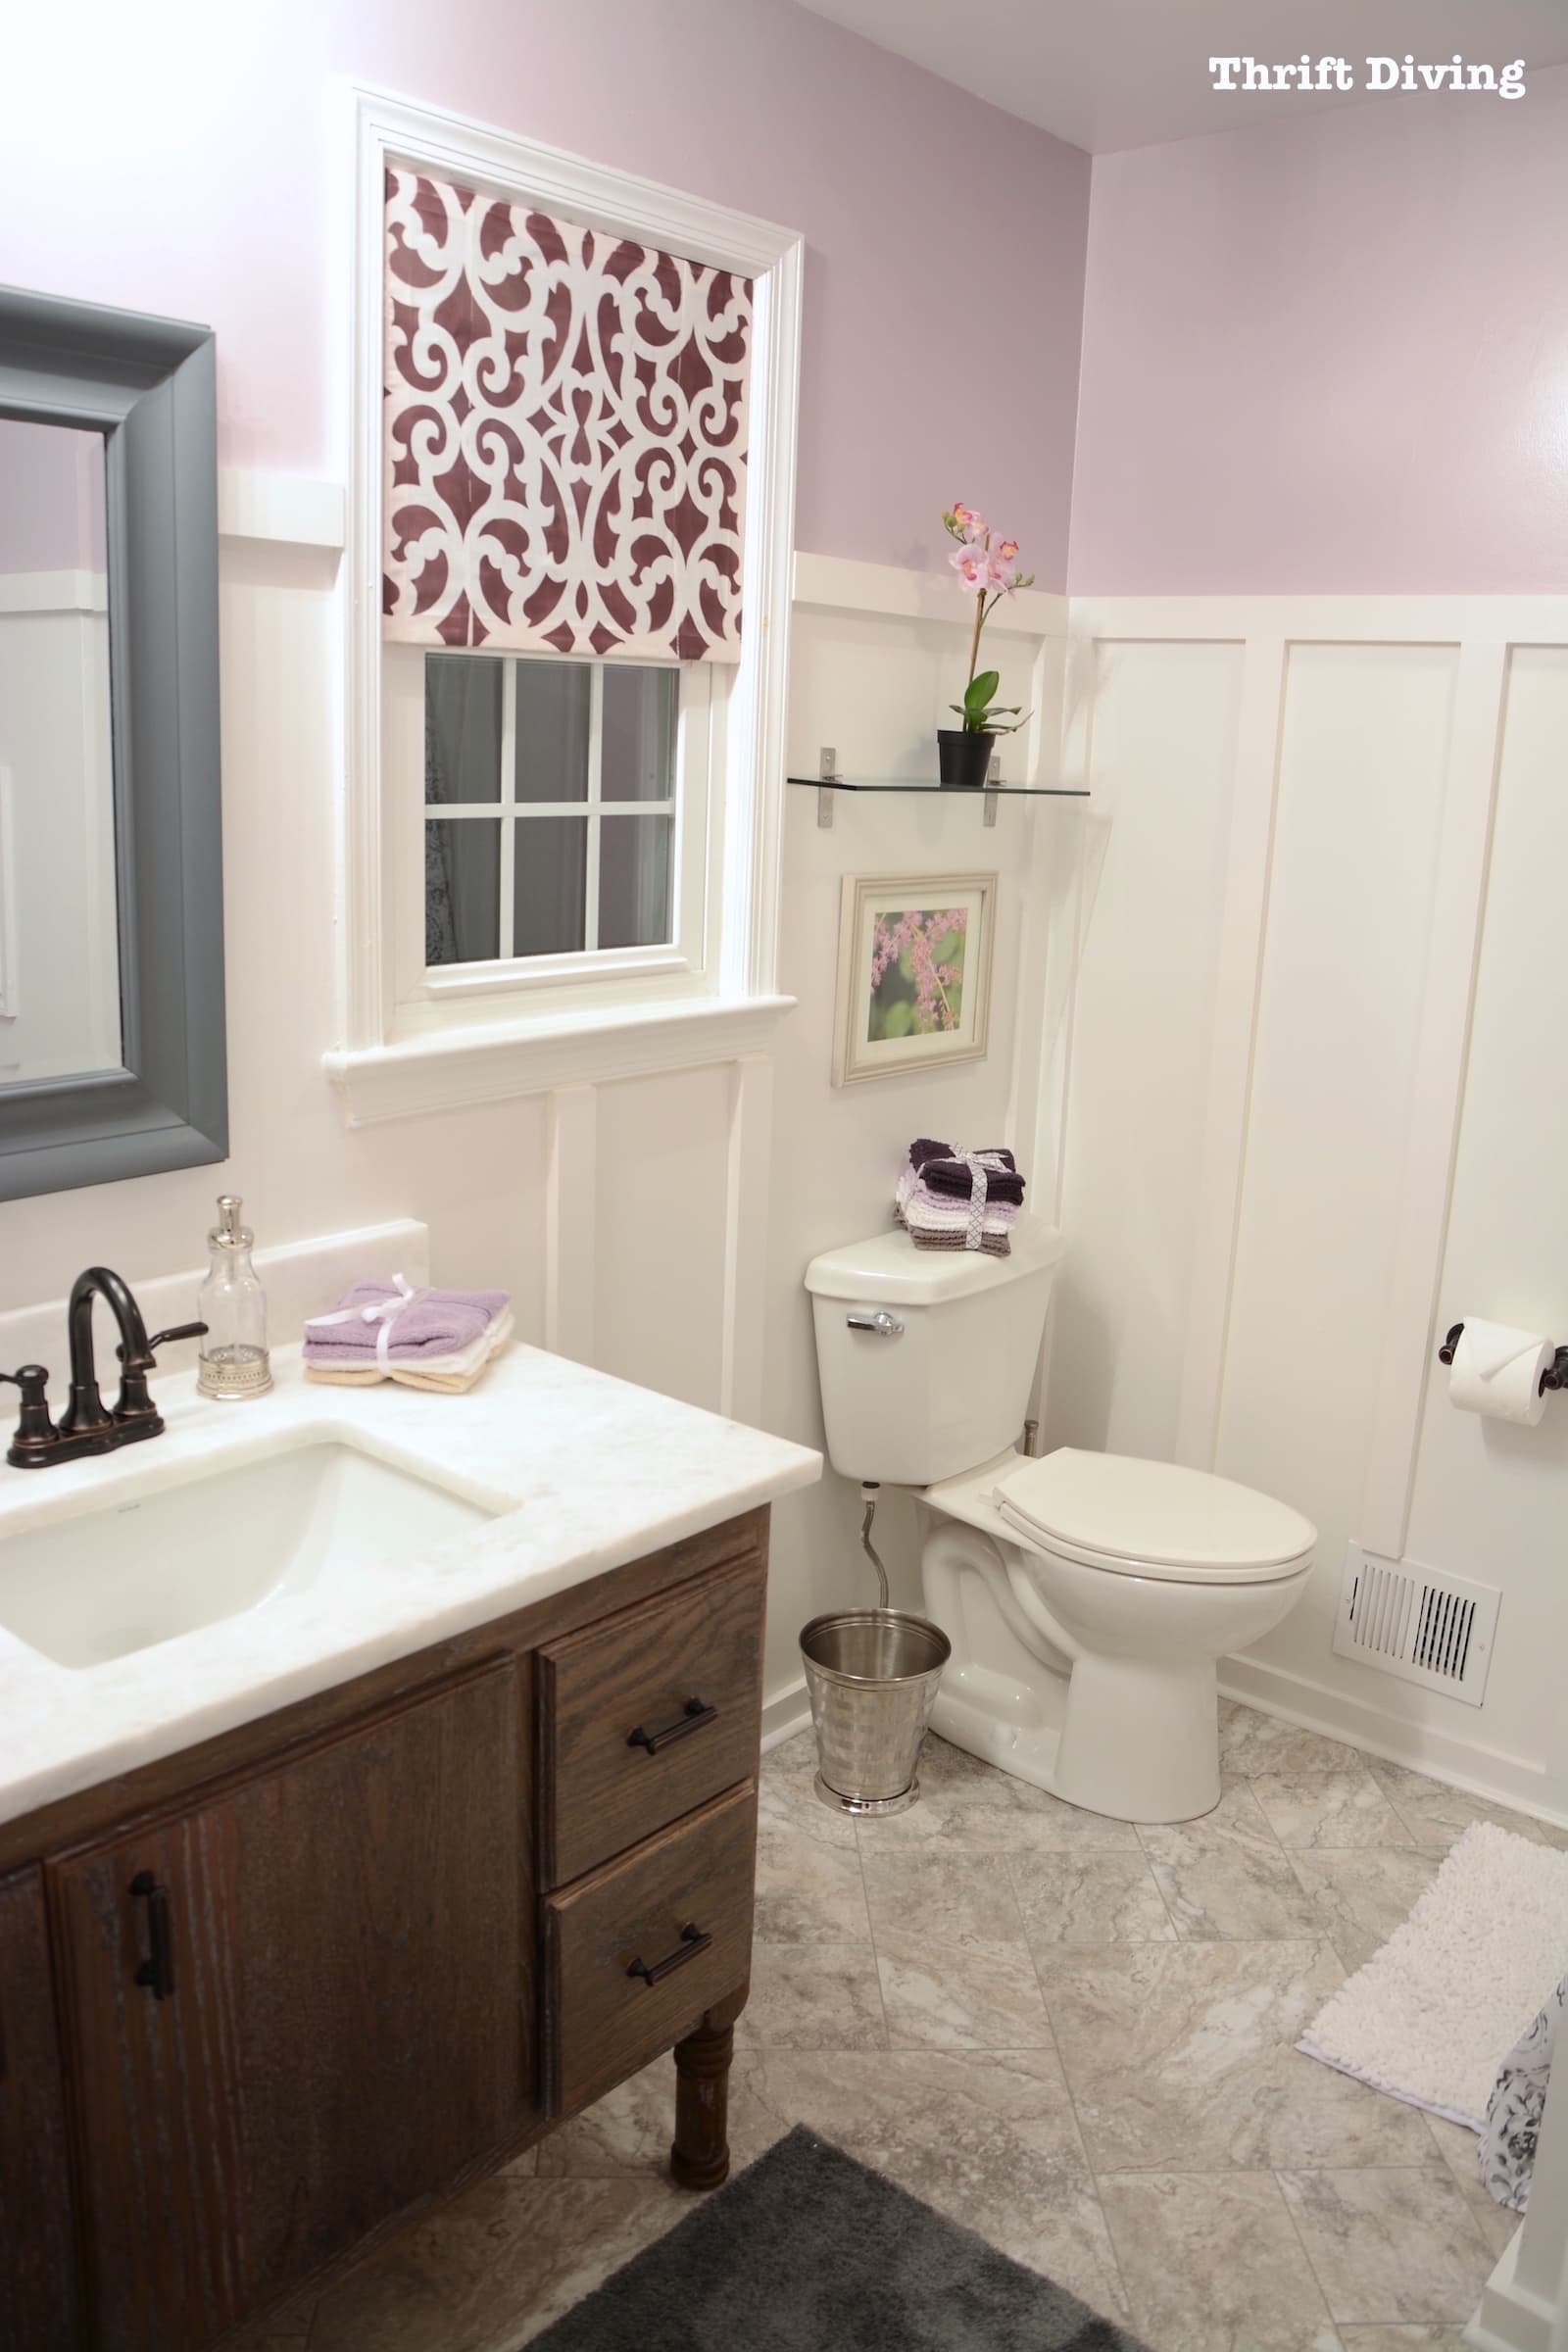 Pretty Lavender Bathroom Makeovers - Behr Mulberry Stain wall paint. - Thrift Diving